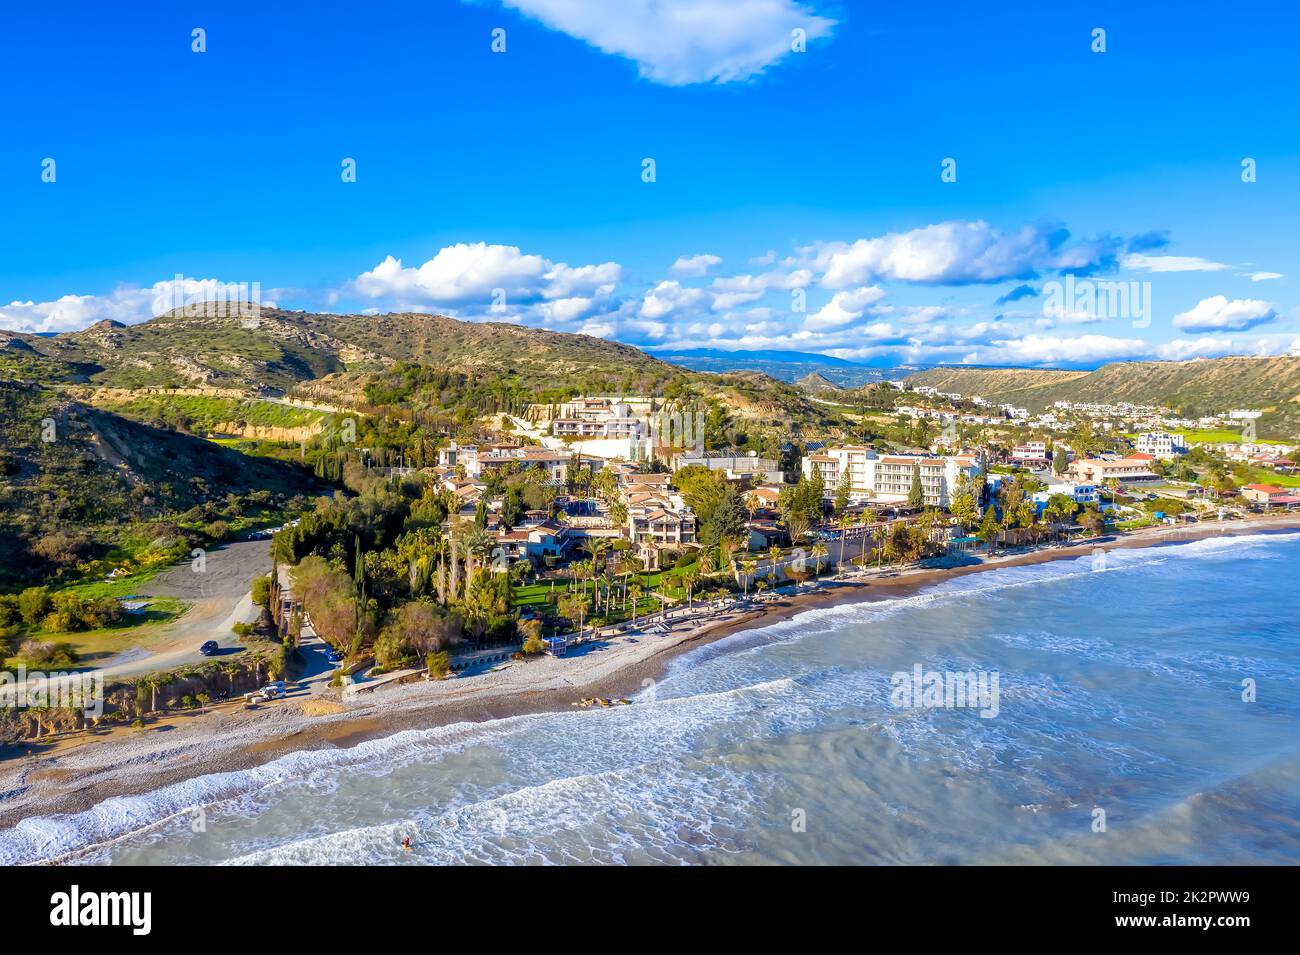 View of beach and hotels of Pissouri.Limassol District, Cyprus Stock Photo